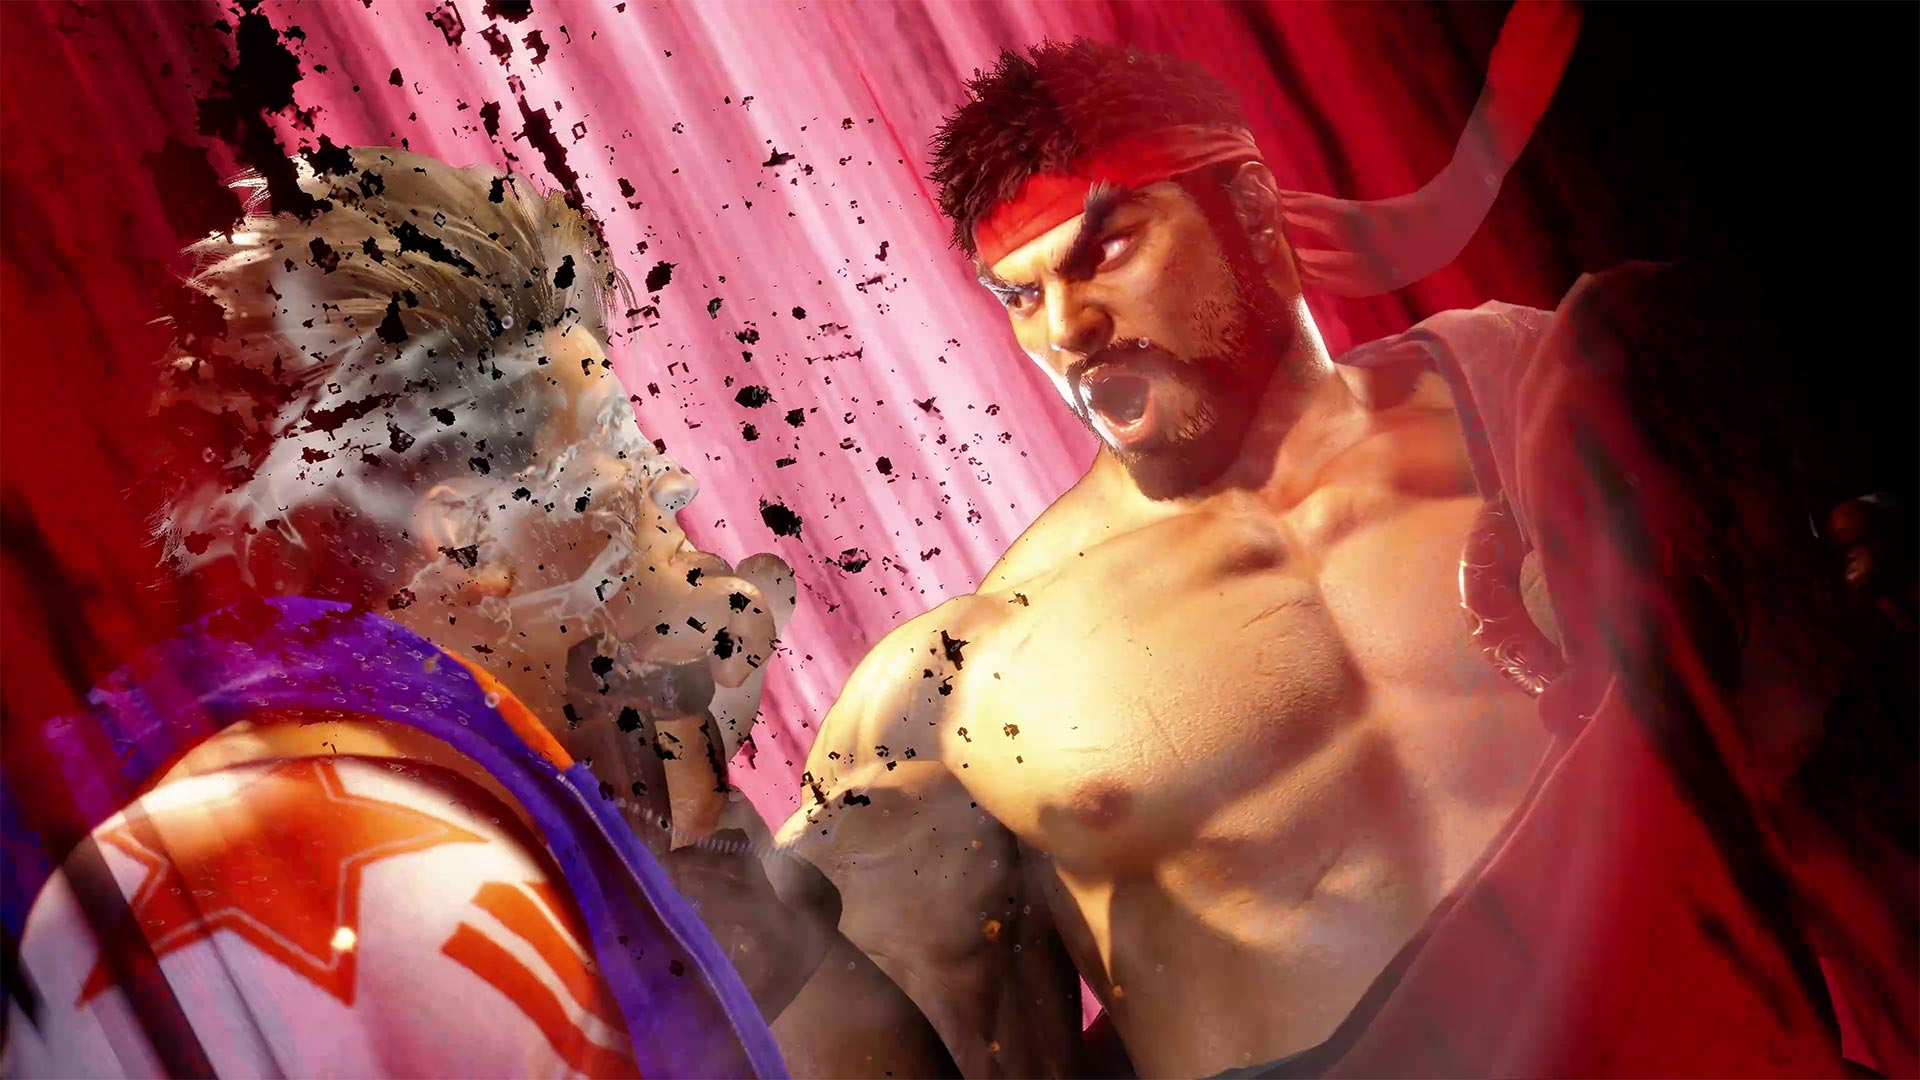 The Lead Up To Street Fighter 6 - PART TWO